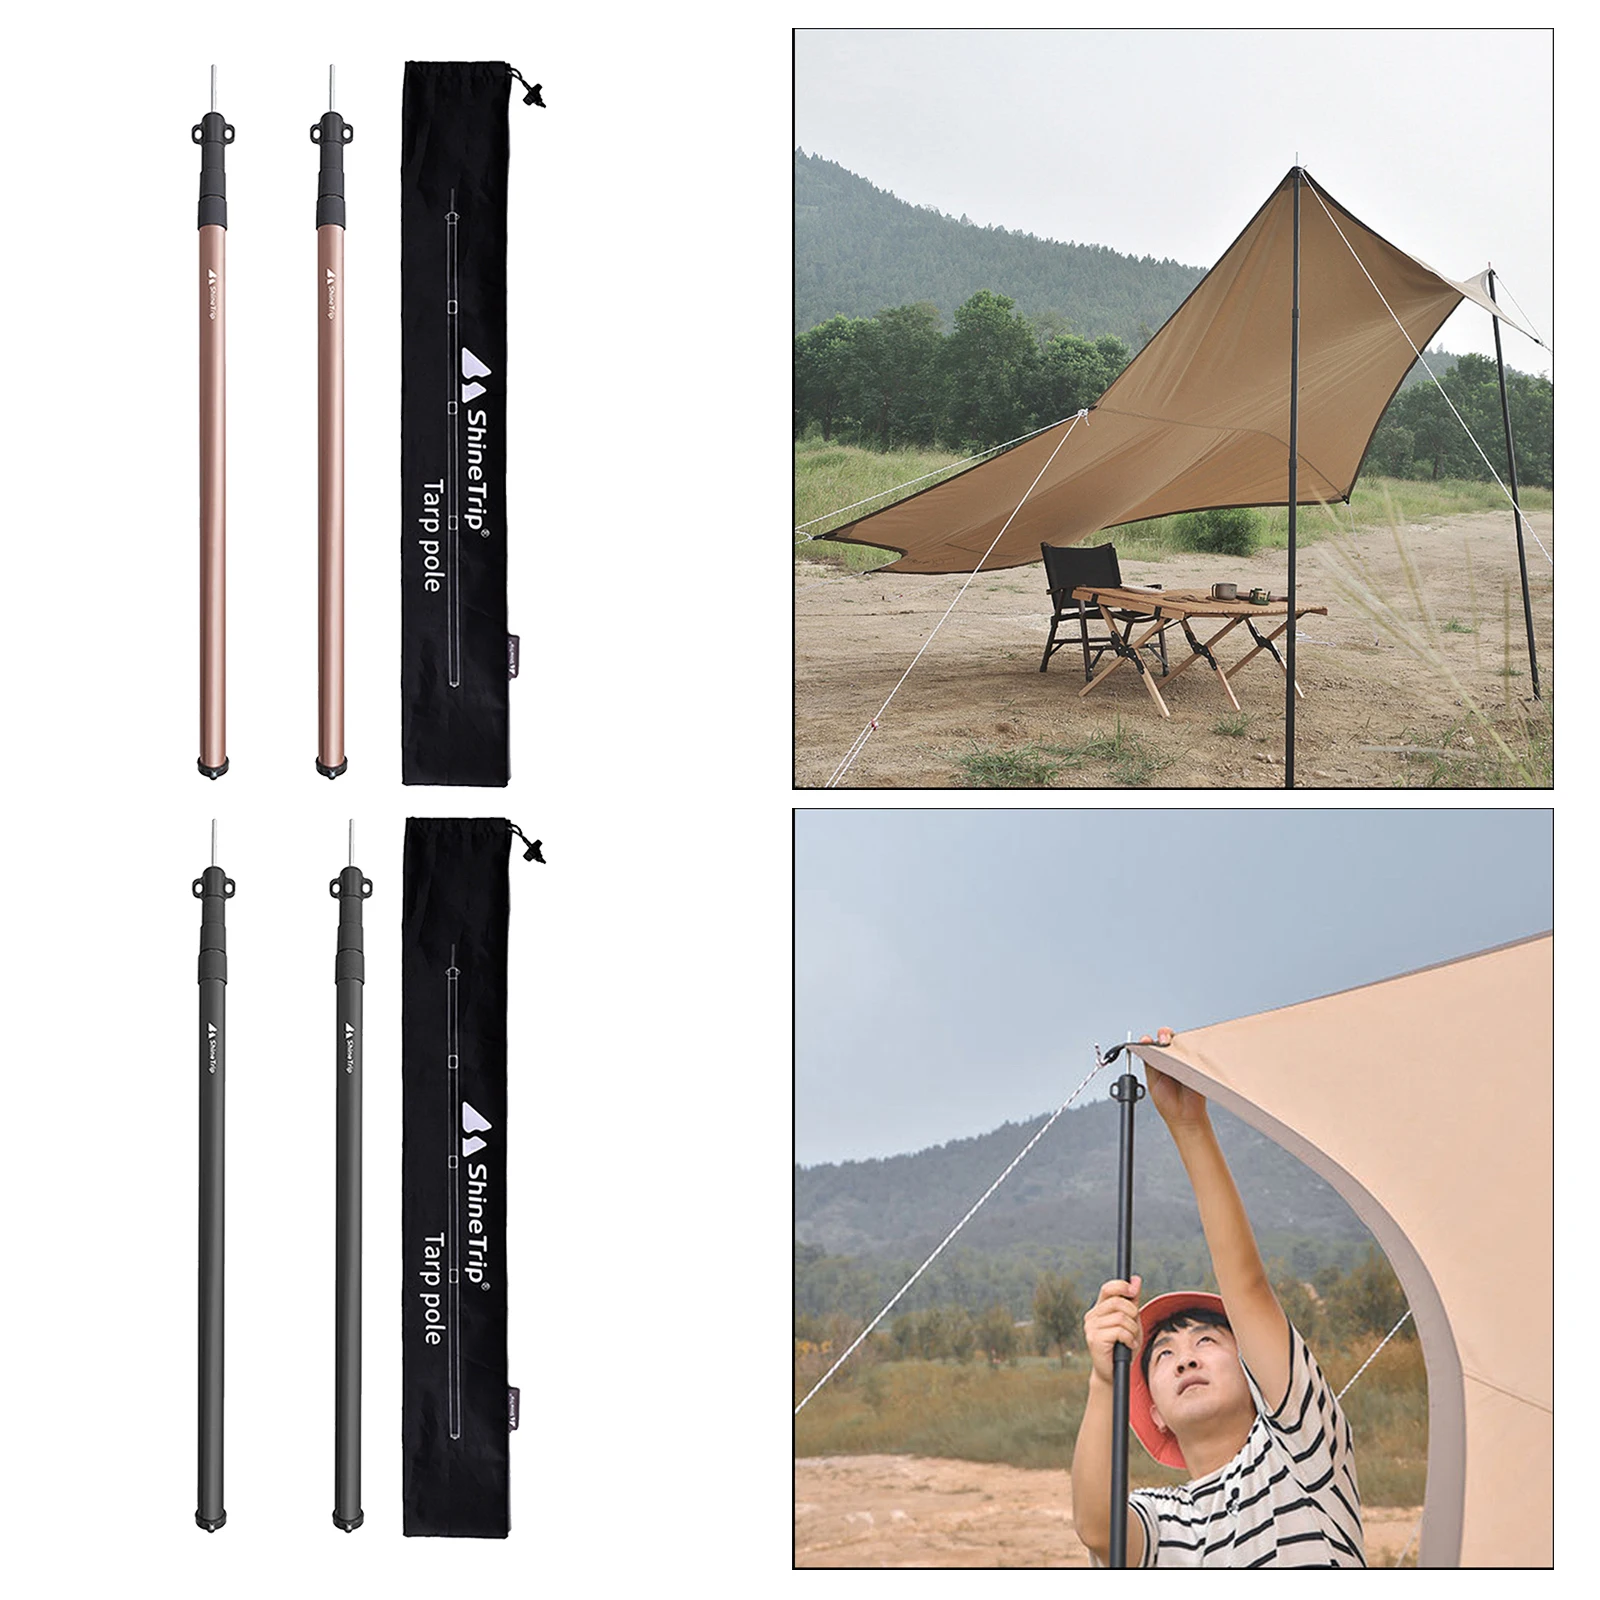 Adjustable Tarp Poles, Set of 2 Telescopic Rods for Tent Fly Tarps Support, Tent Poles for Camping, Backpacking, Hiking